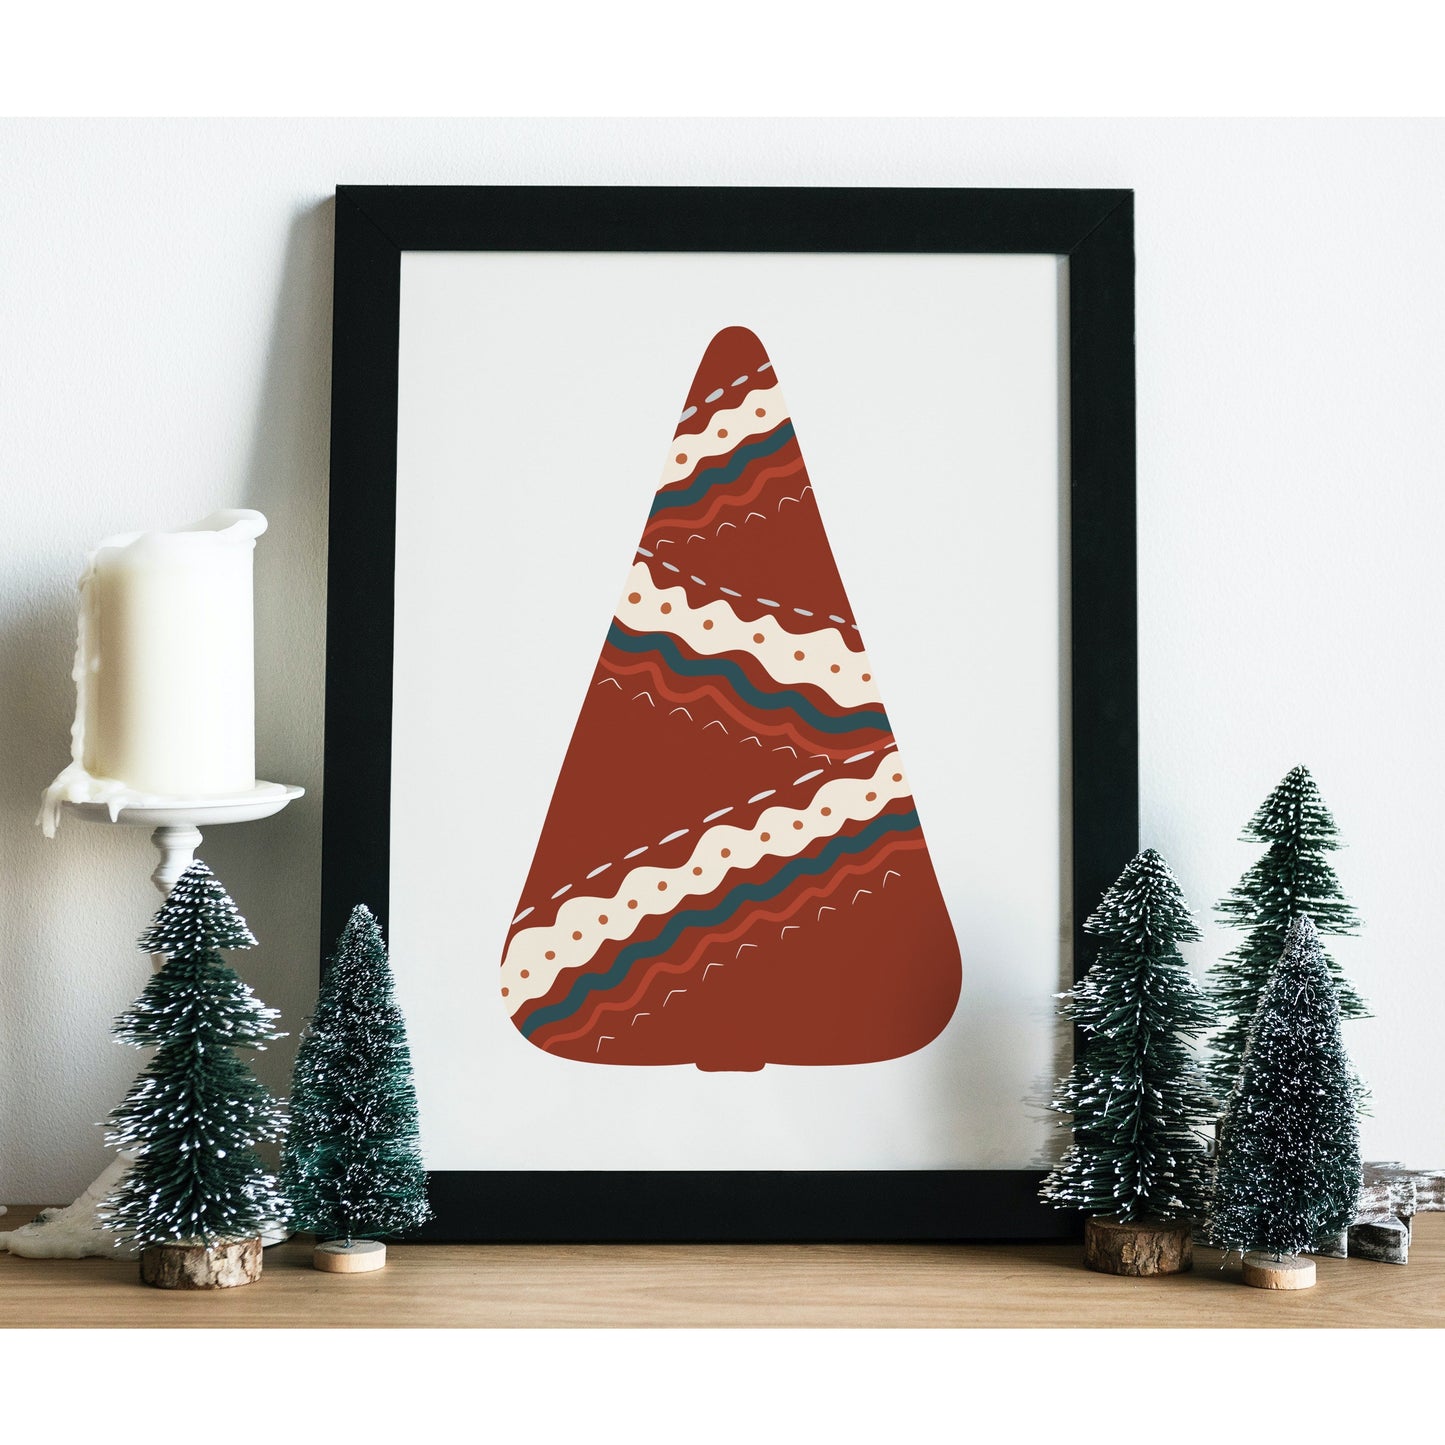 Looking for something unique to inject some bohemian Christmas cheer into your home this year? Look no further than our Boho Christmas Tree Art Print Poster